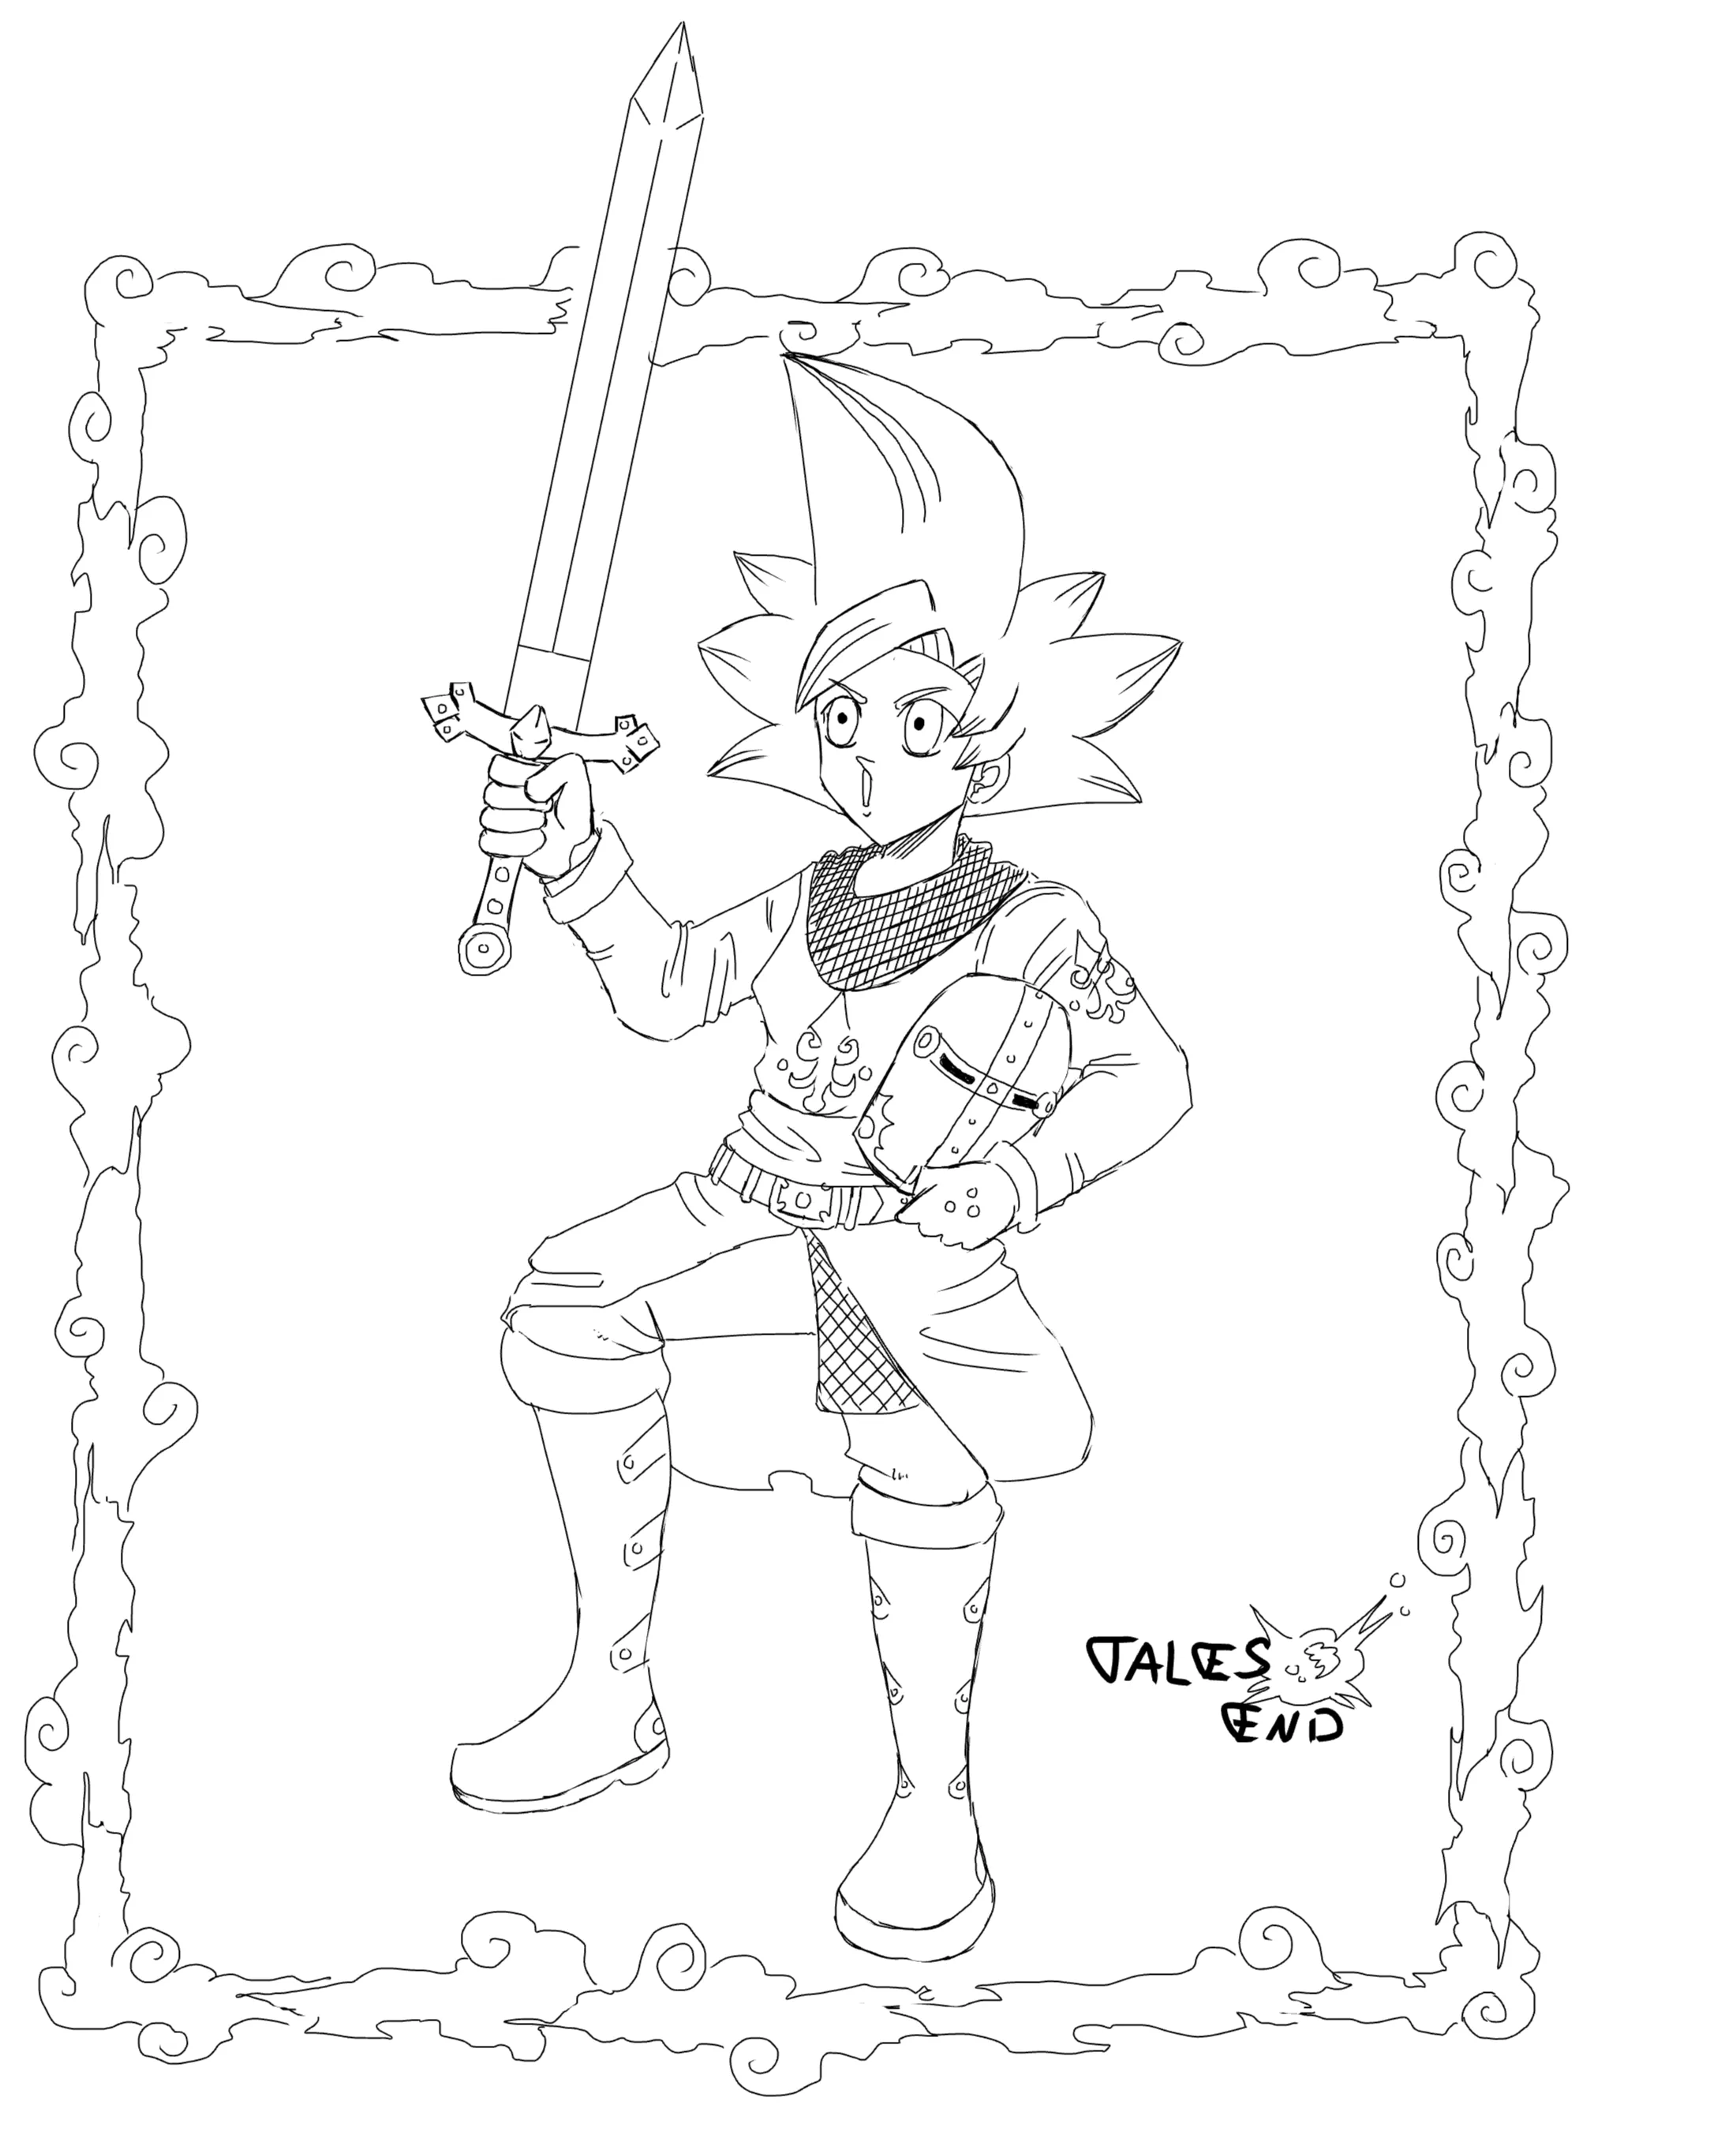 Tales end - sam as a knight 2